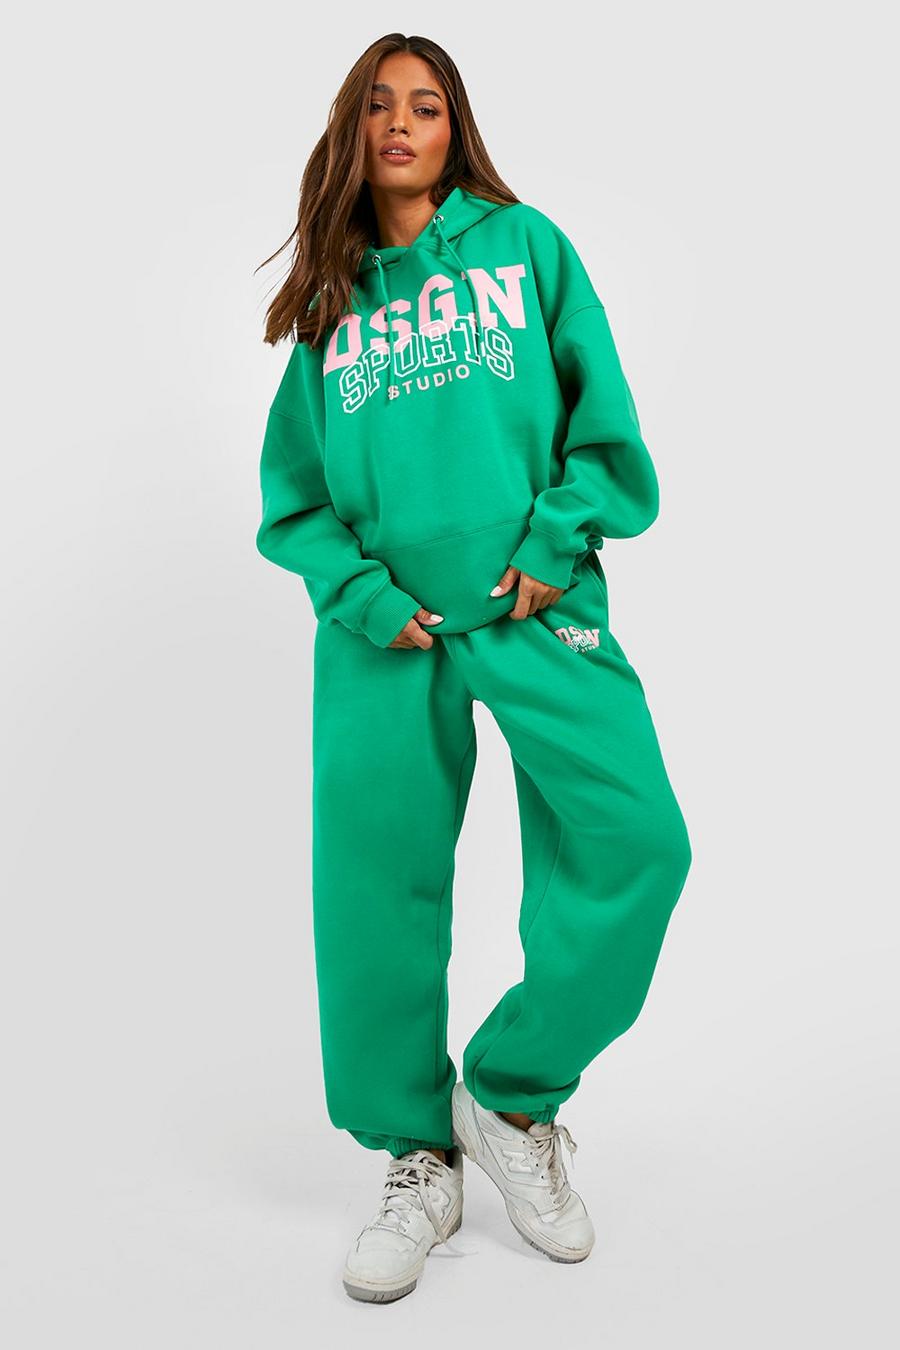 Green Dsgn Sports Slogan Hooded Tracksuit 